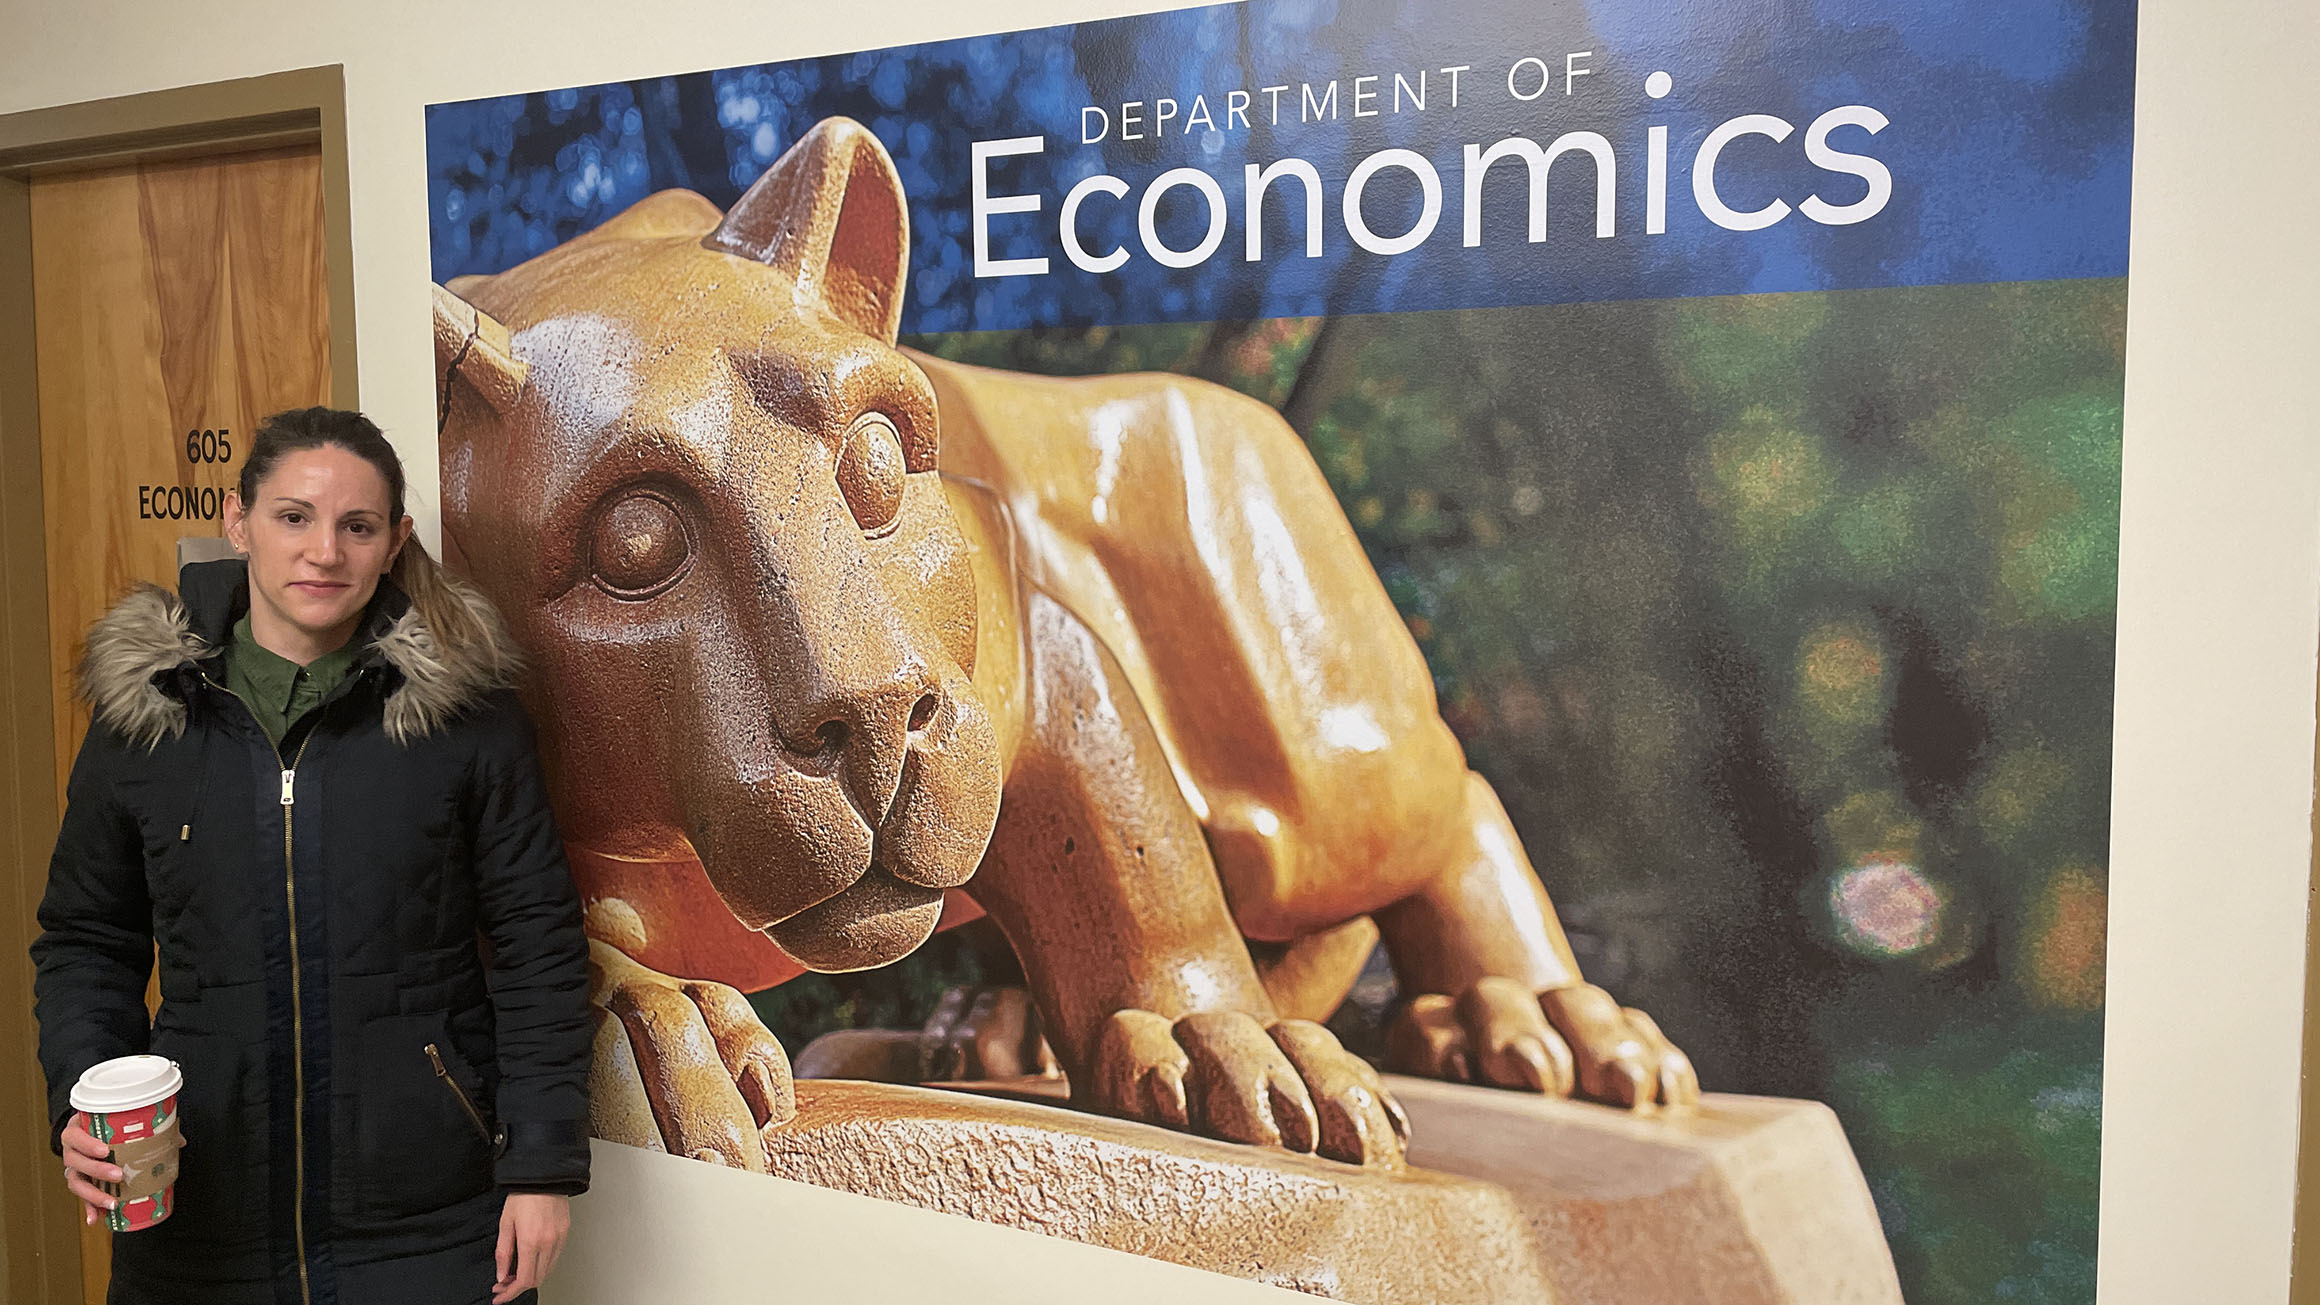 Marian Viera Fuentes stands to the left of the sign for the Department of Economics